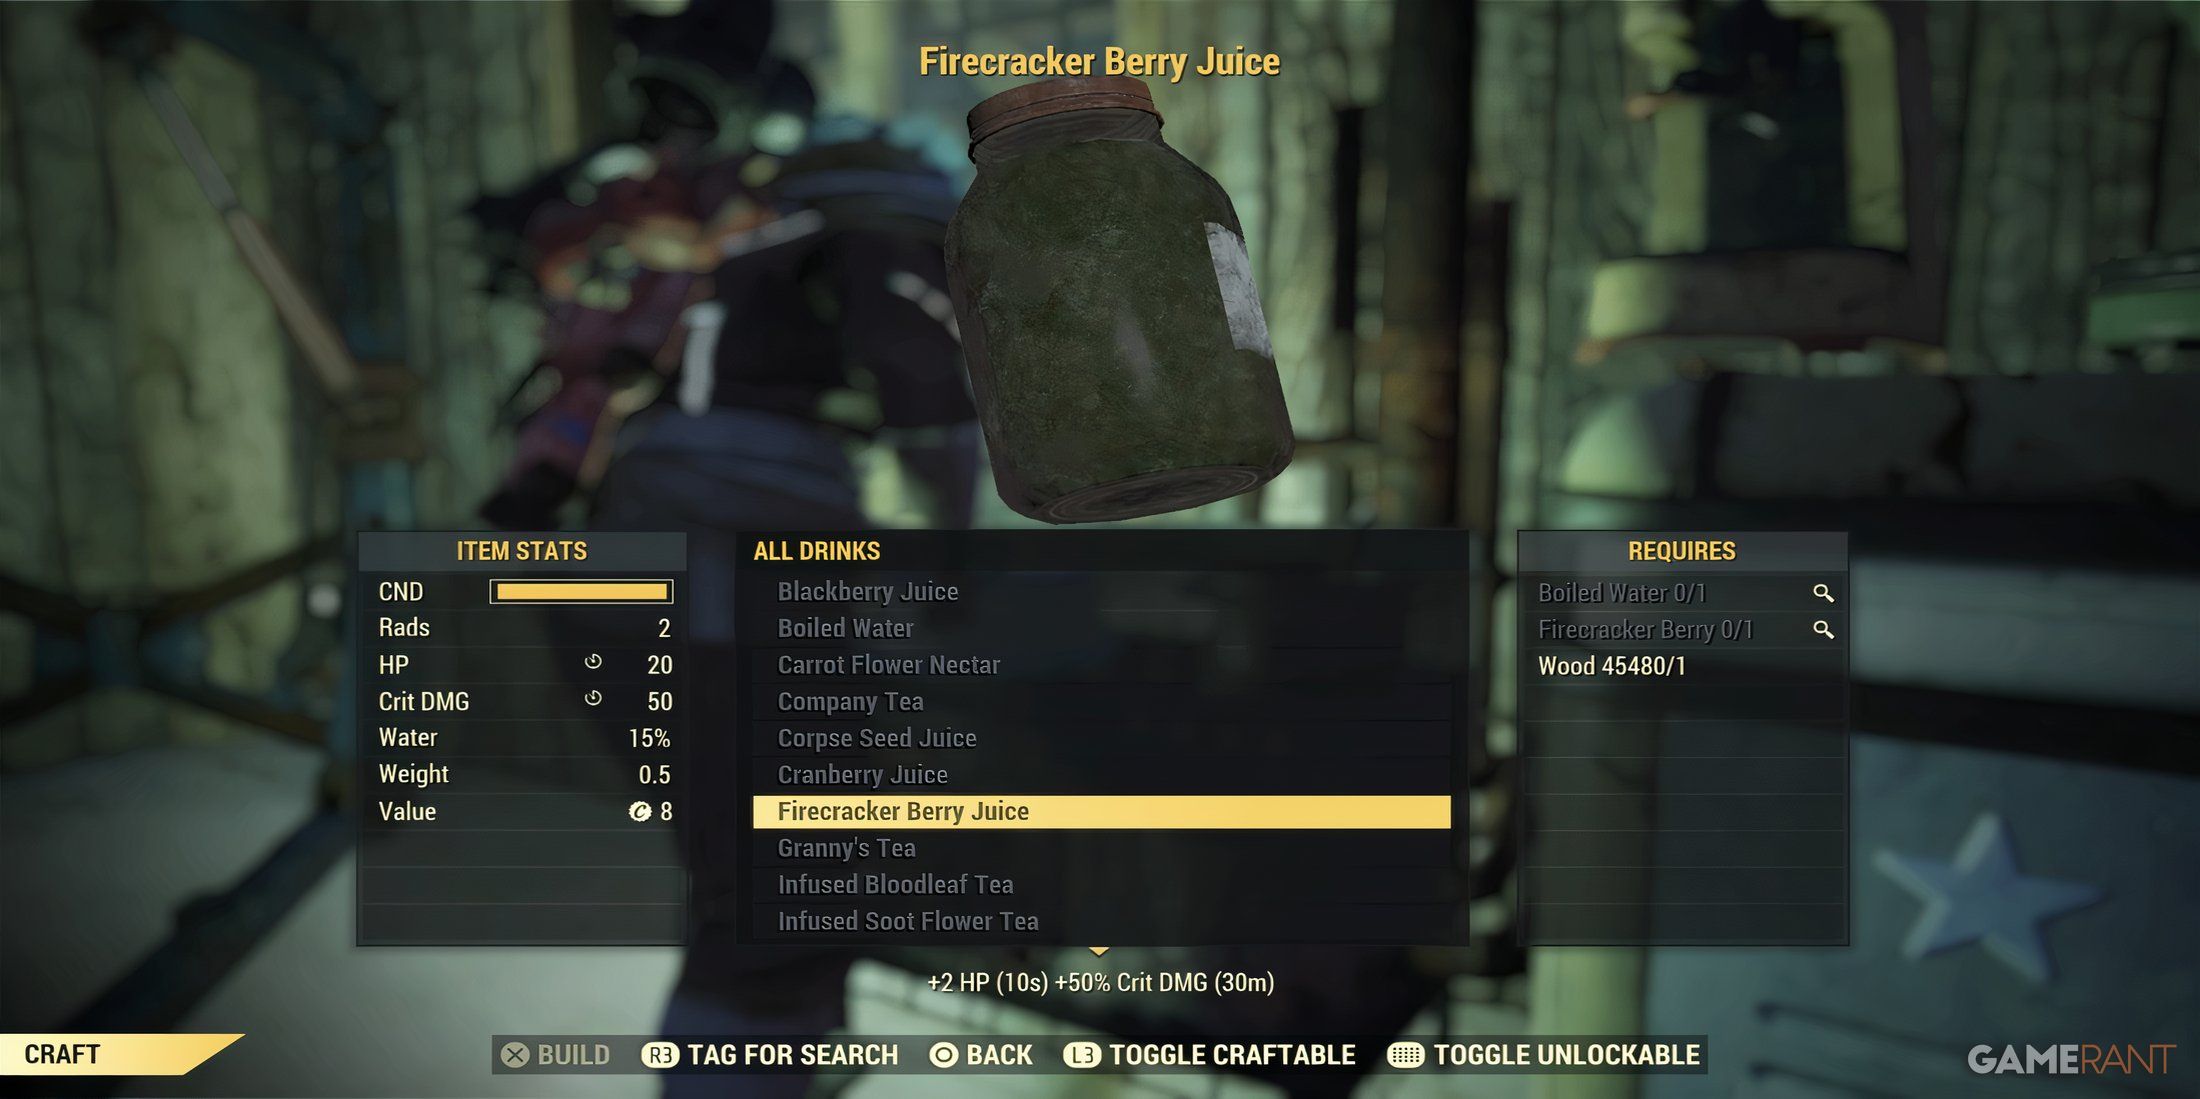 Crafting Firecracker Berry Juice in Fallout 76